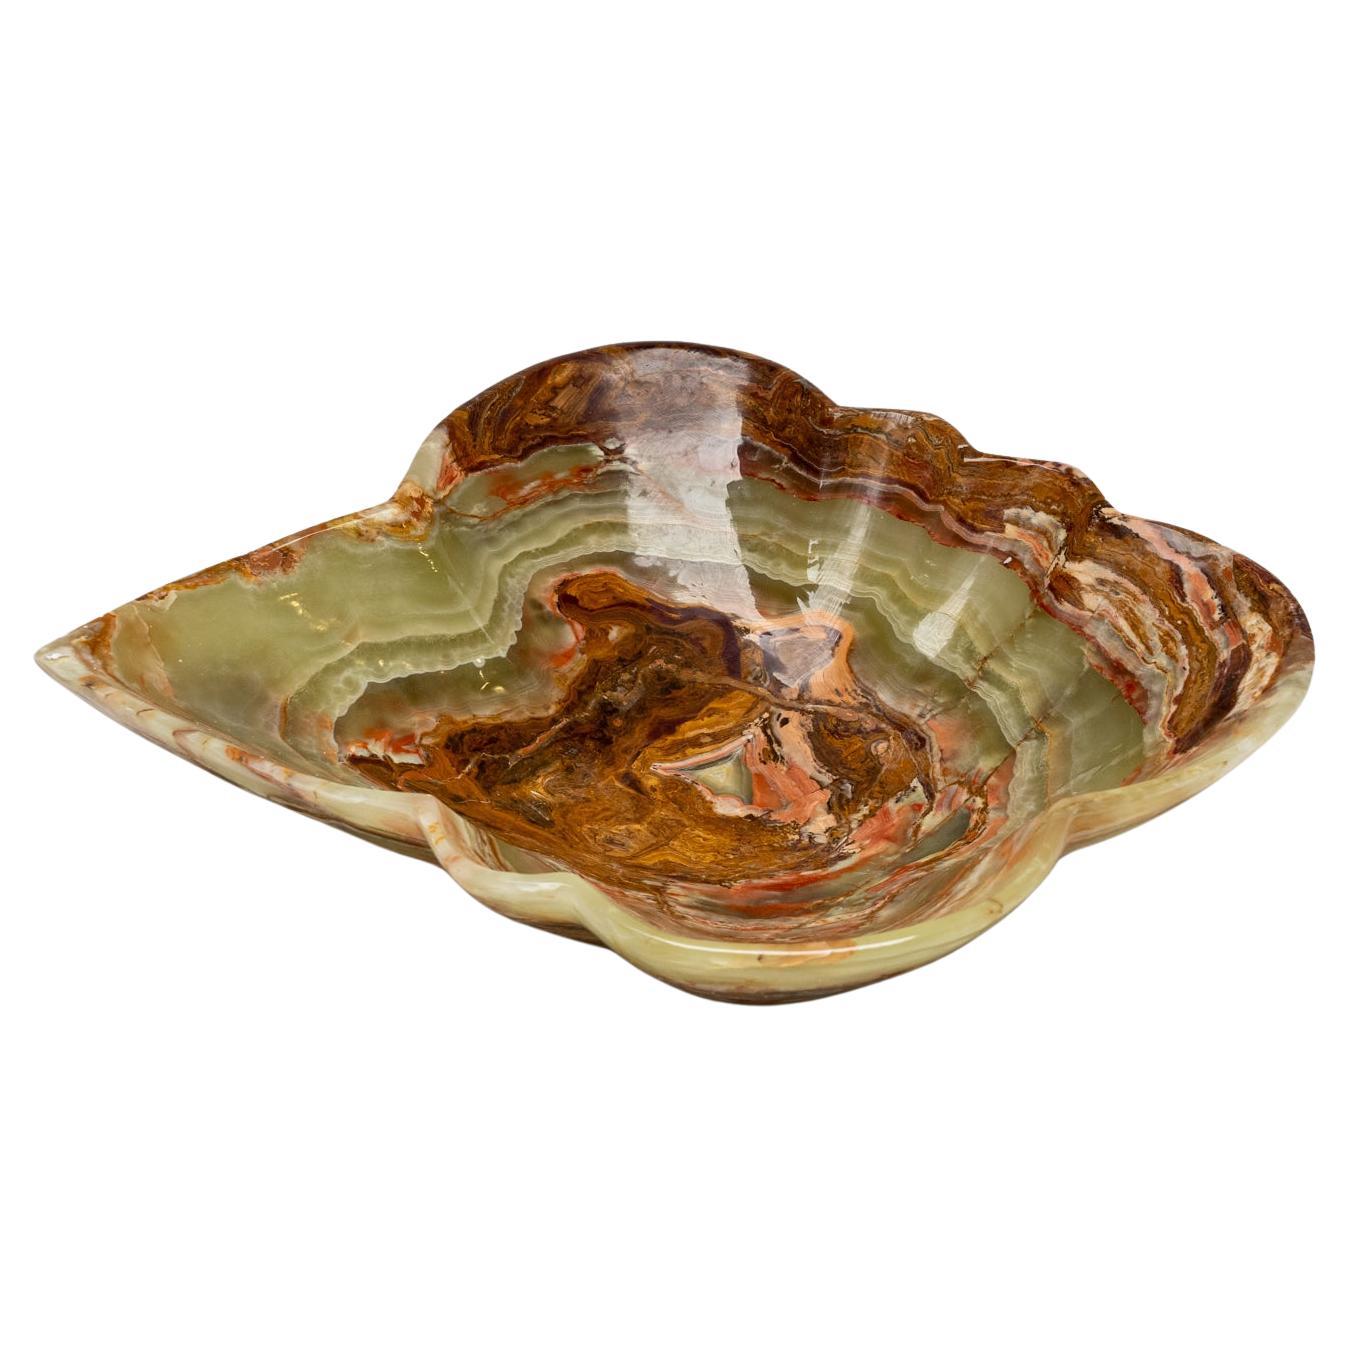 Genuine Polished Green Onyx Bowl from Mexico (9.5 lbs) For Sale